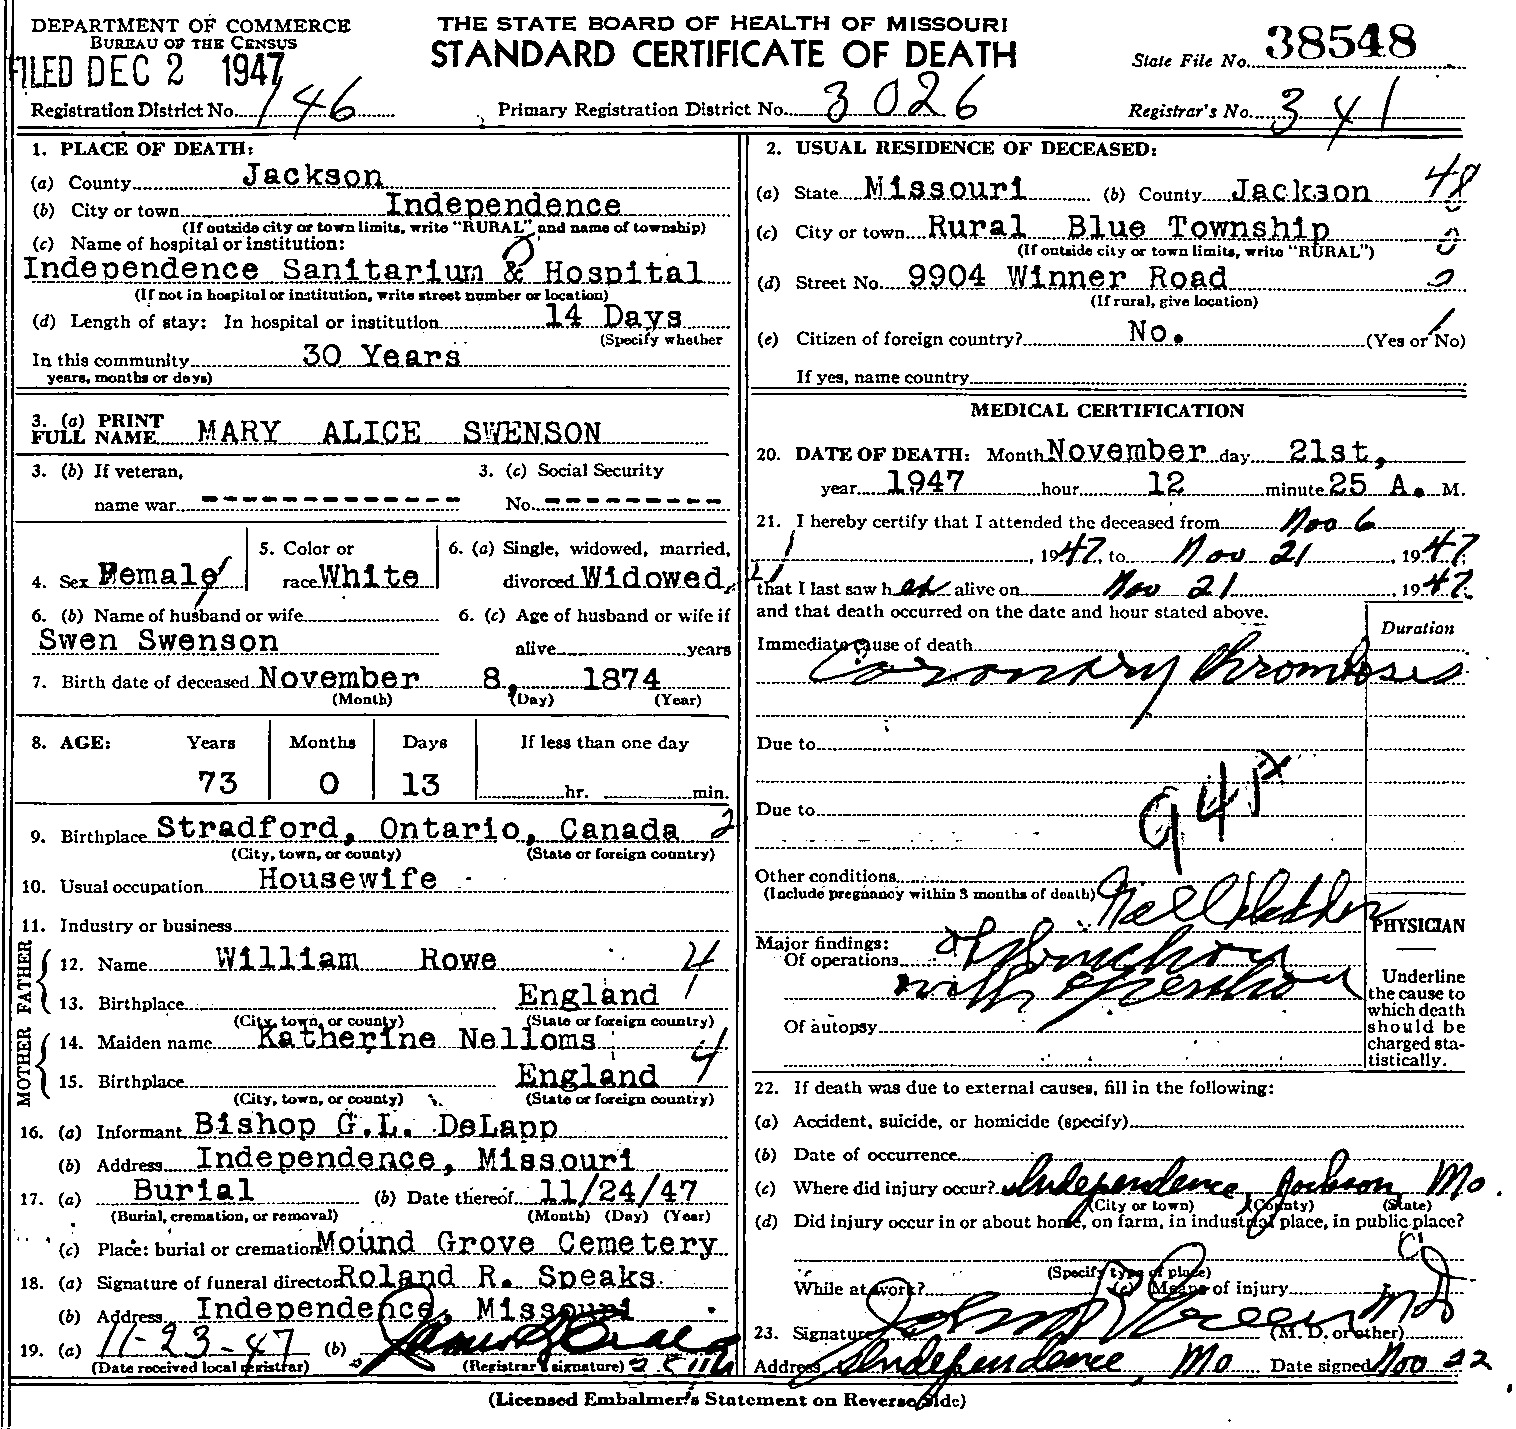 Mary Rowe's death certificate